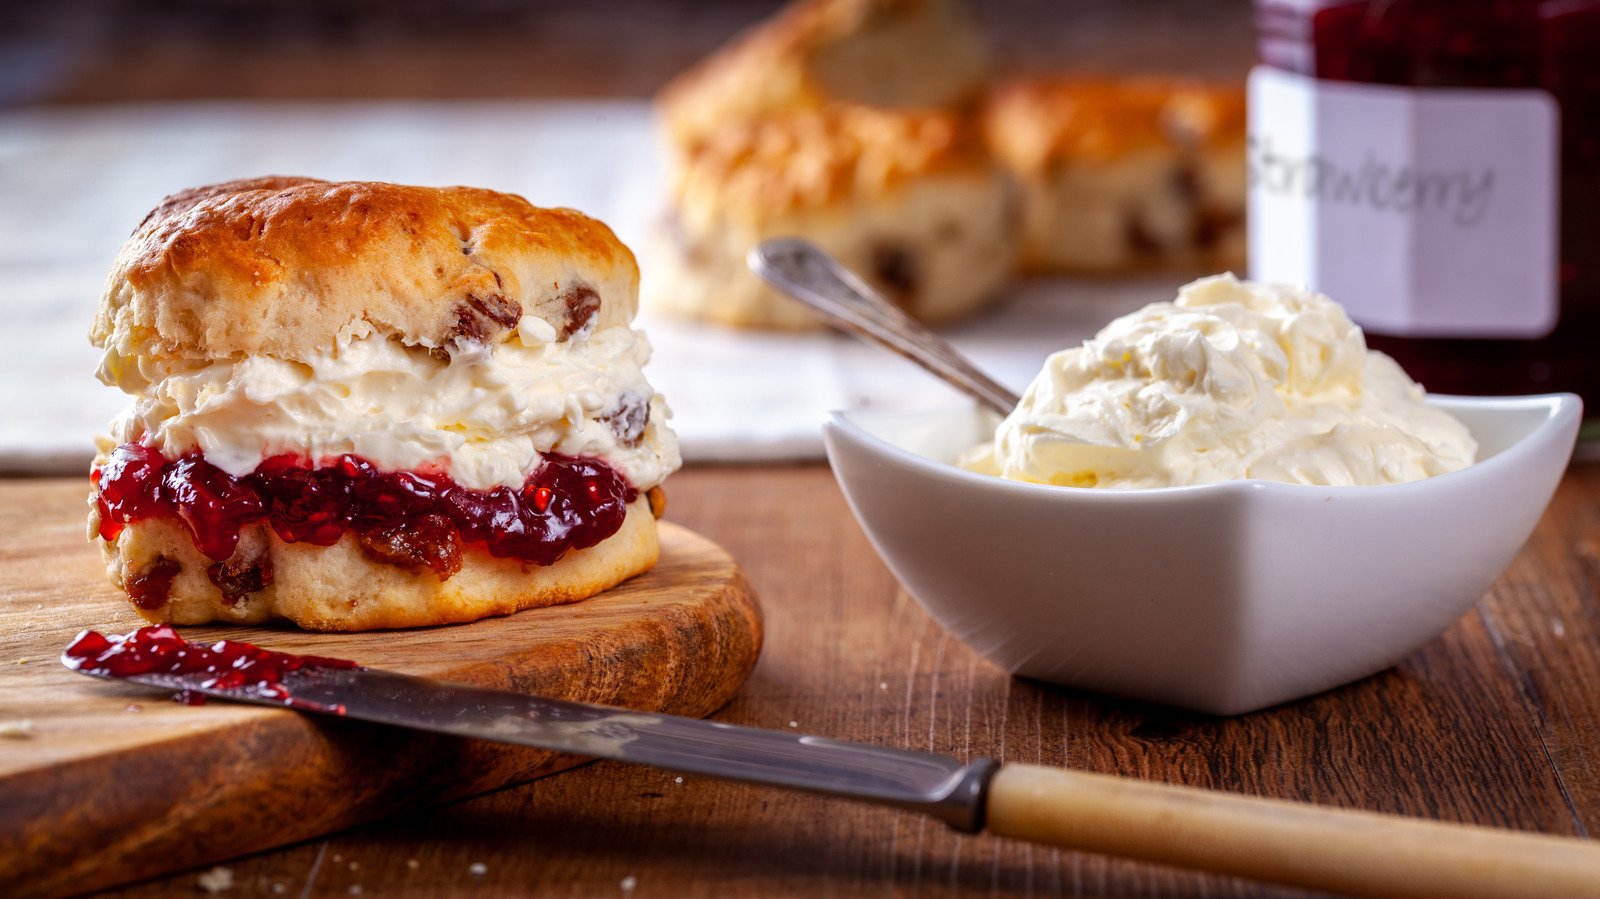 What Is Clotted Cream And Why Is It Illegal In The US?